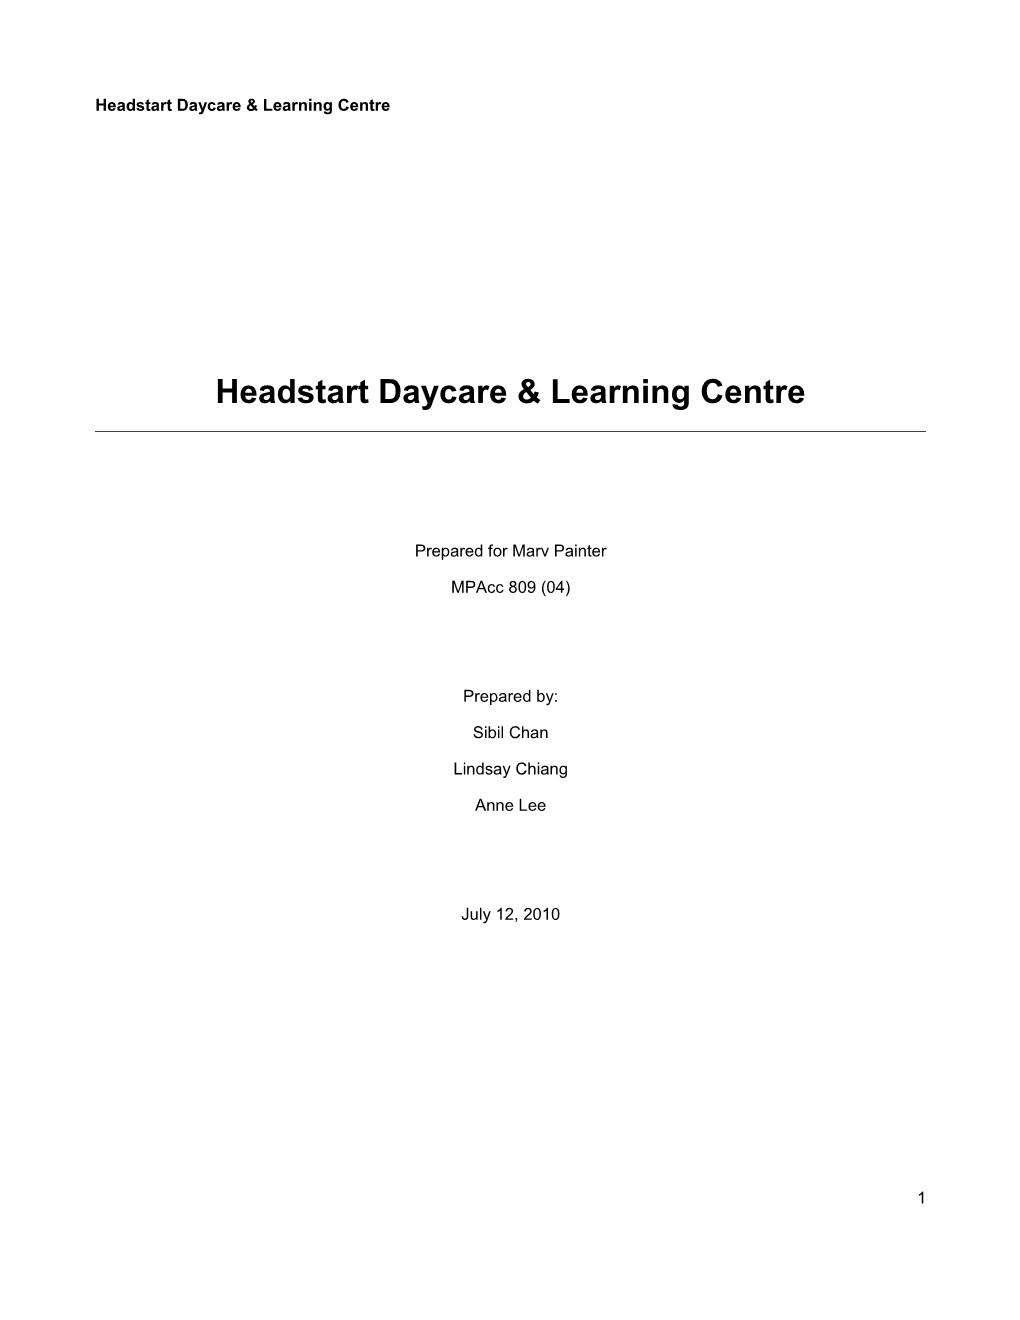 Headstart Daycare & Learning Centre